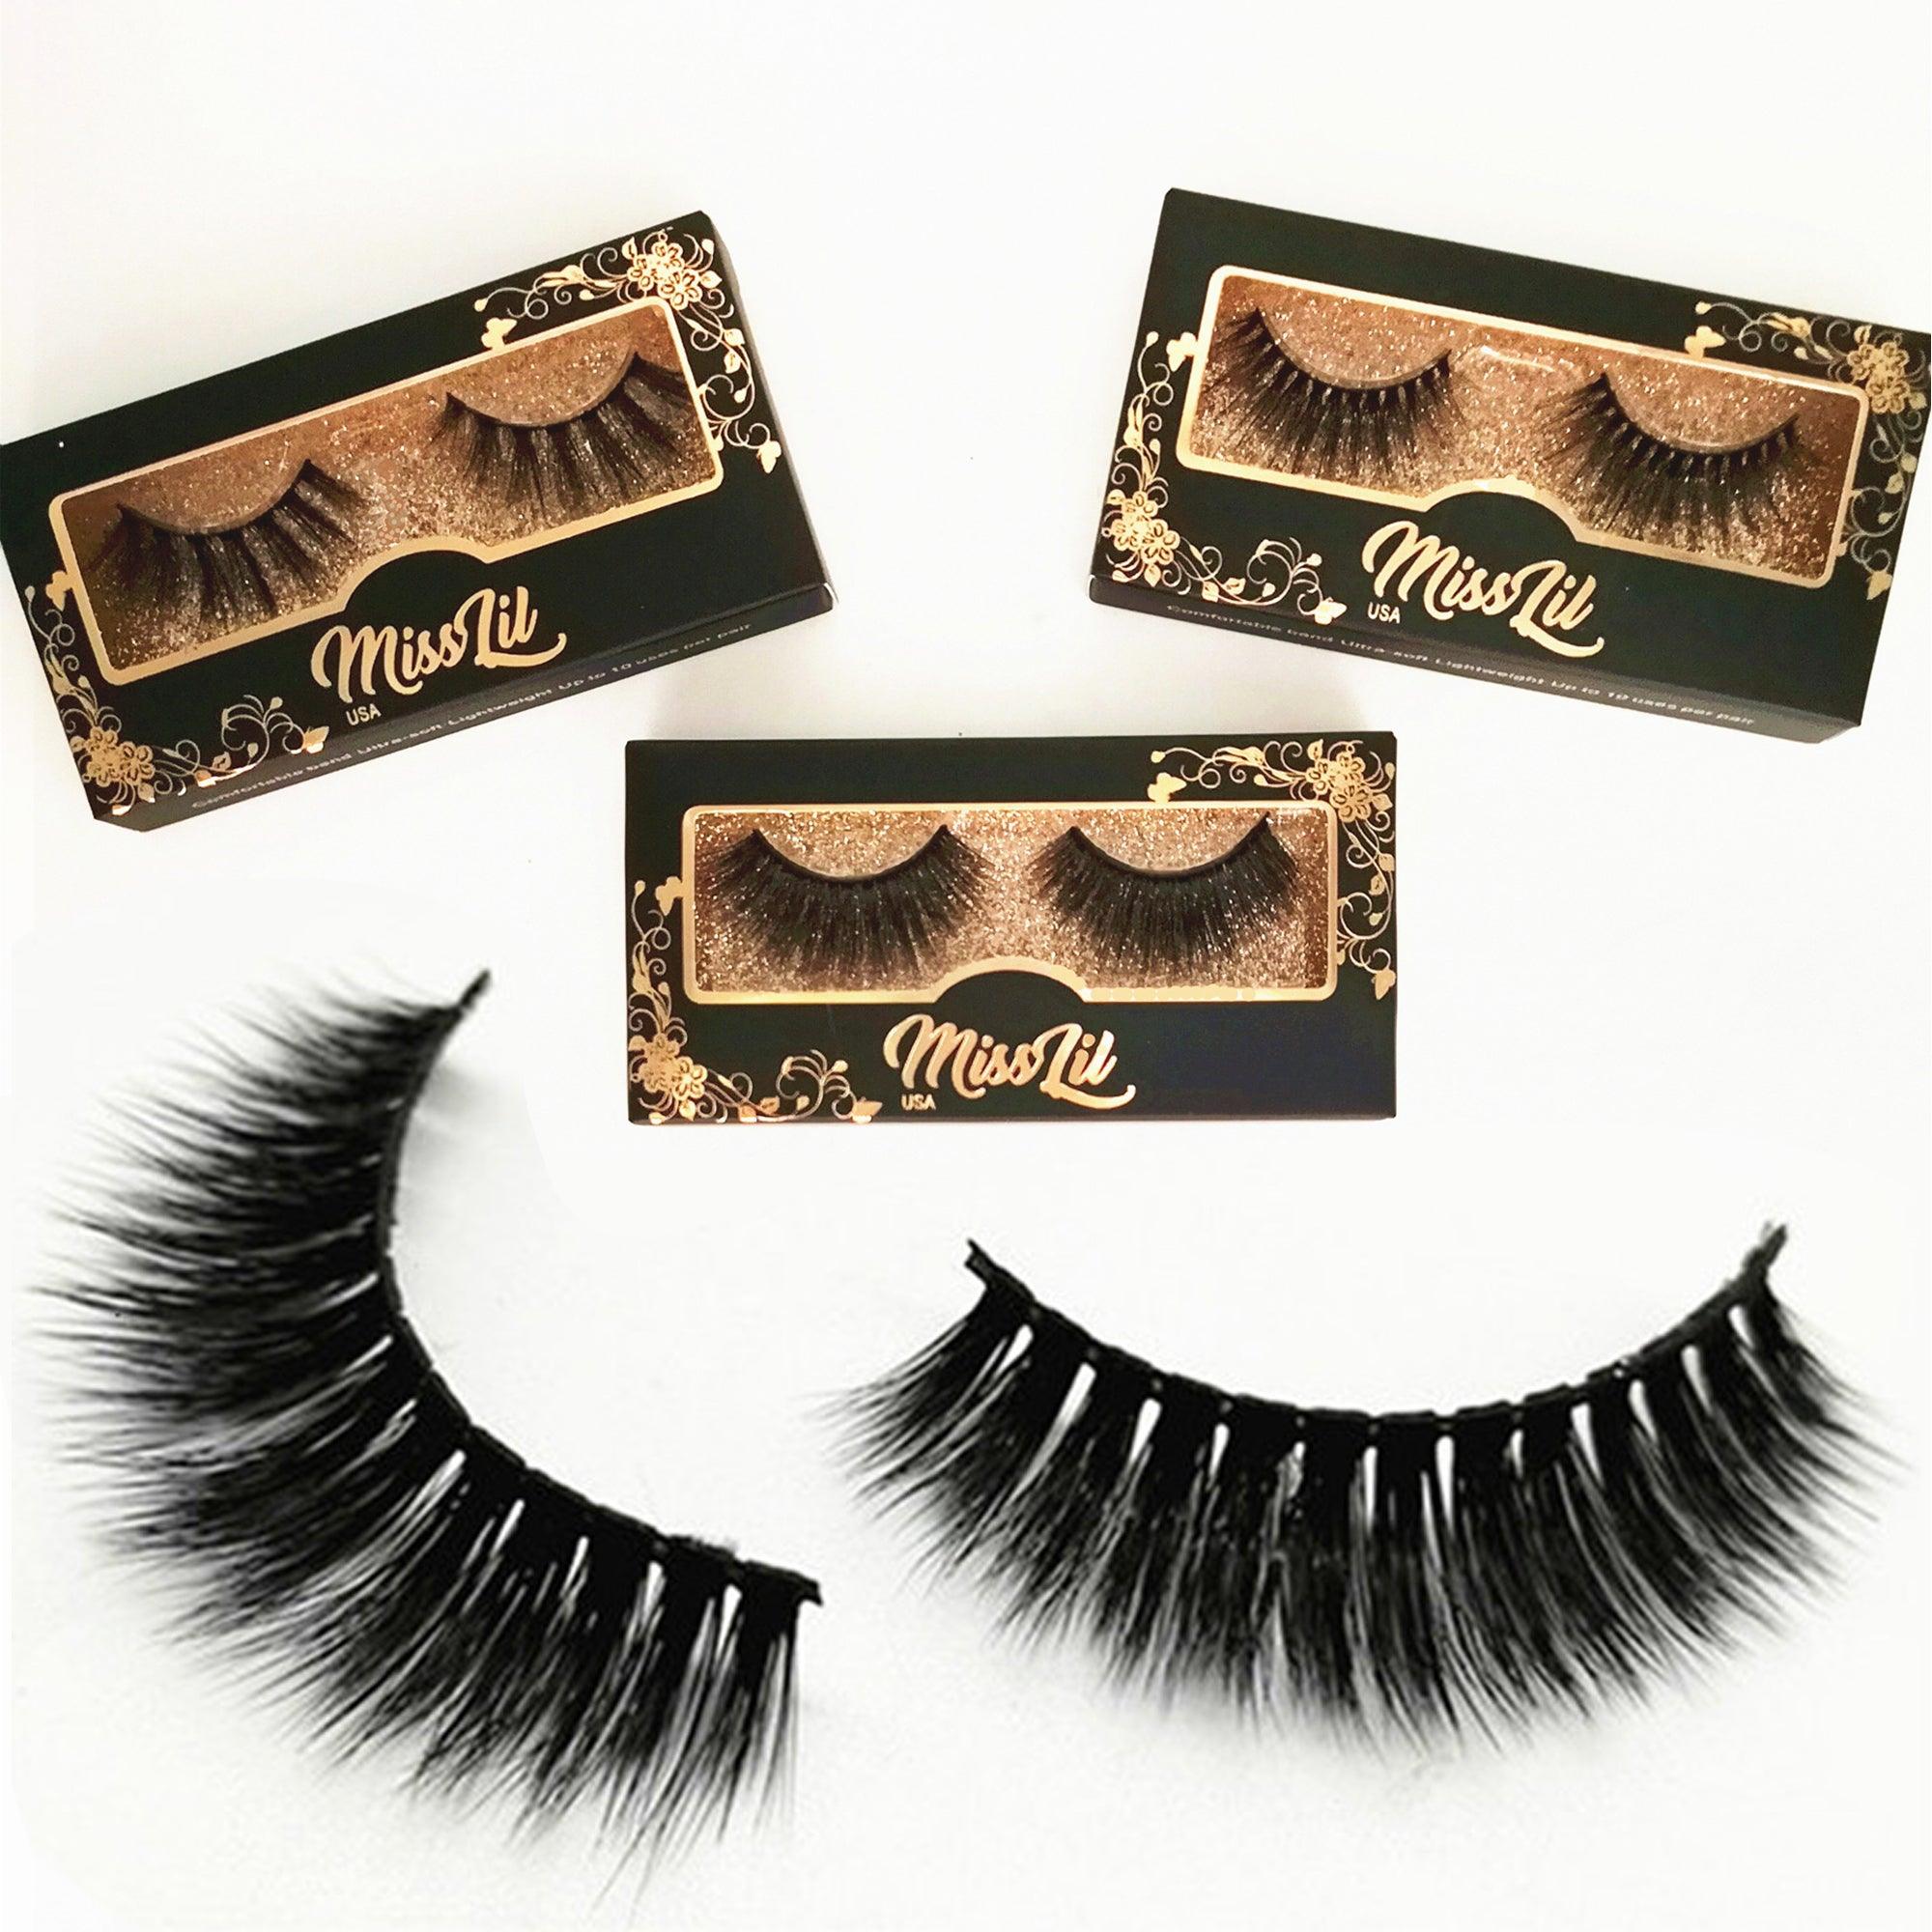 1-Pair Miss Lil USA Lashes #39 (Pack of 12) - Miss Lil USA Wholesale